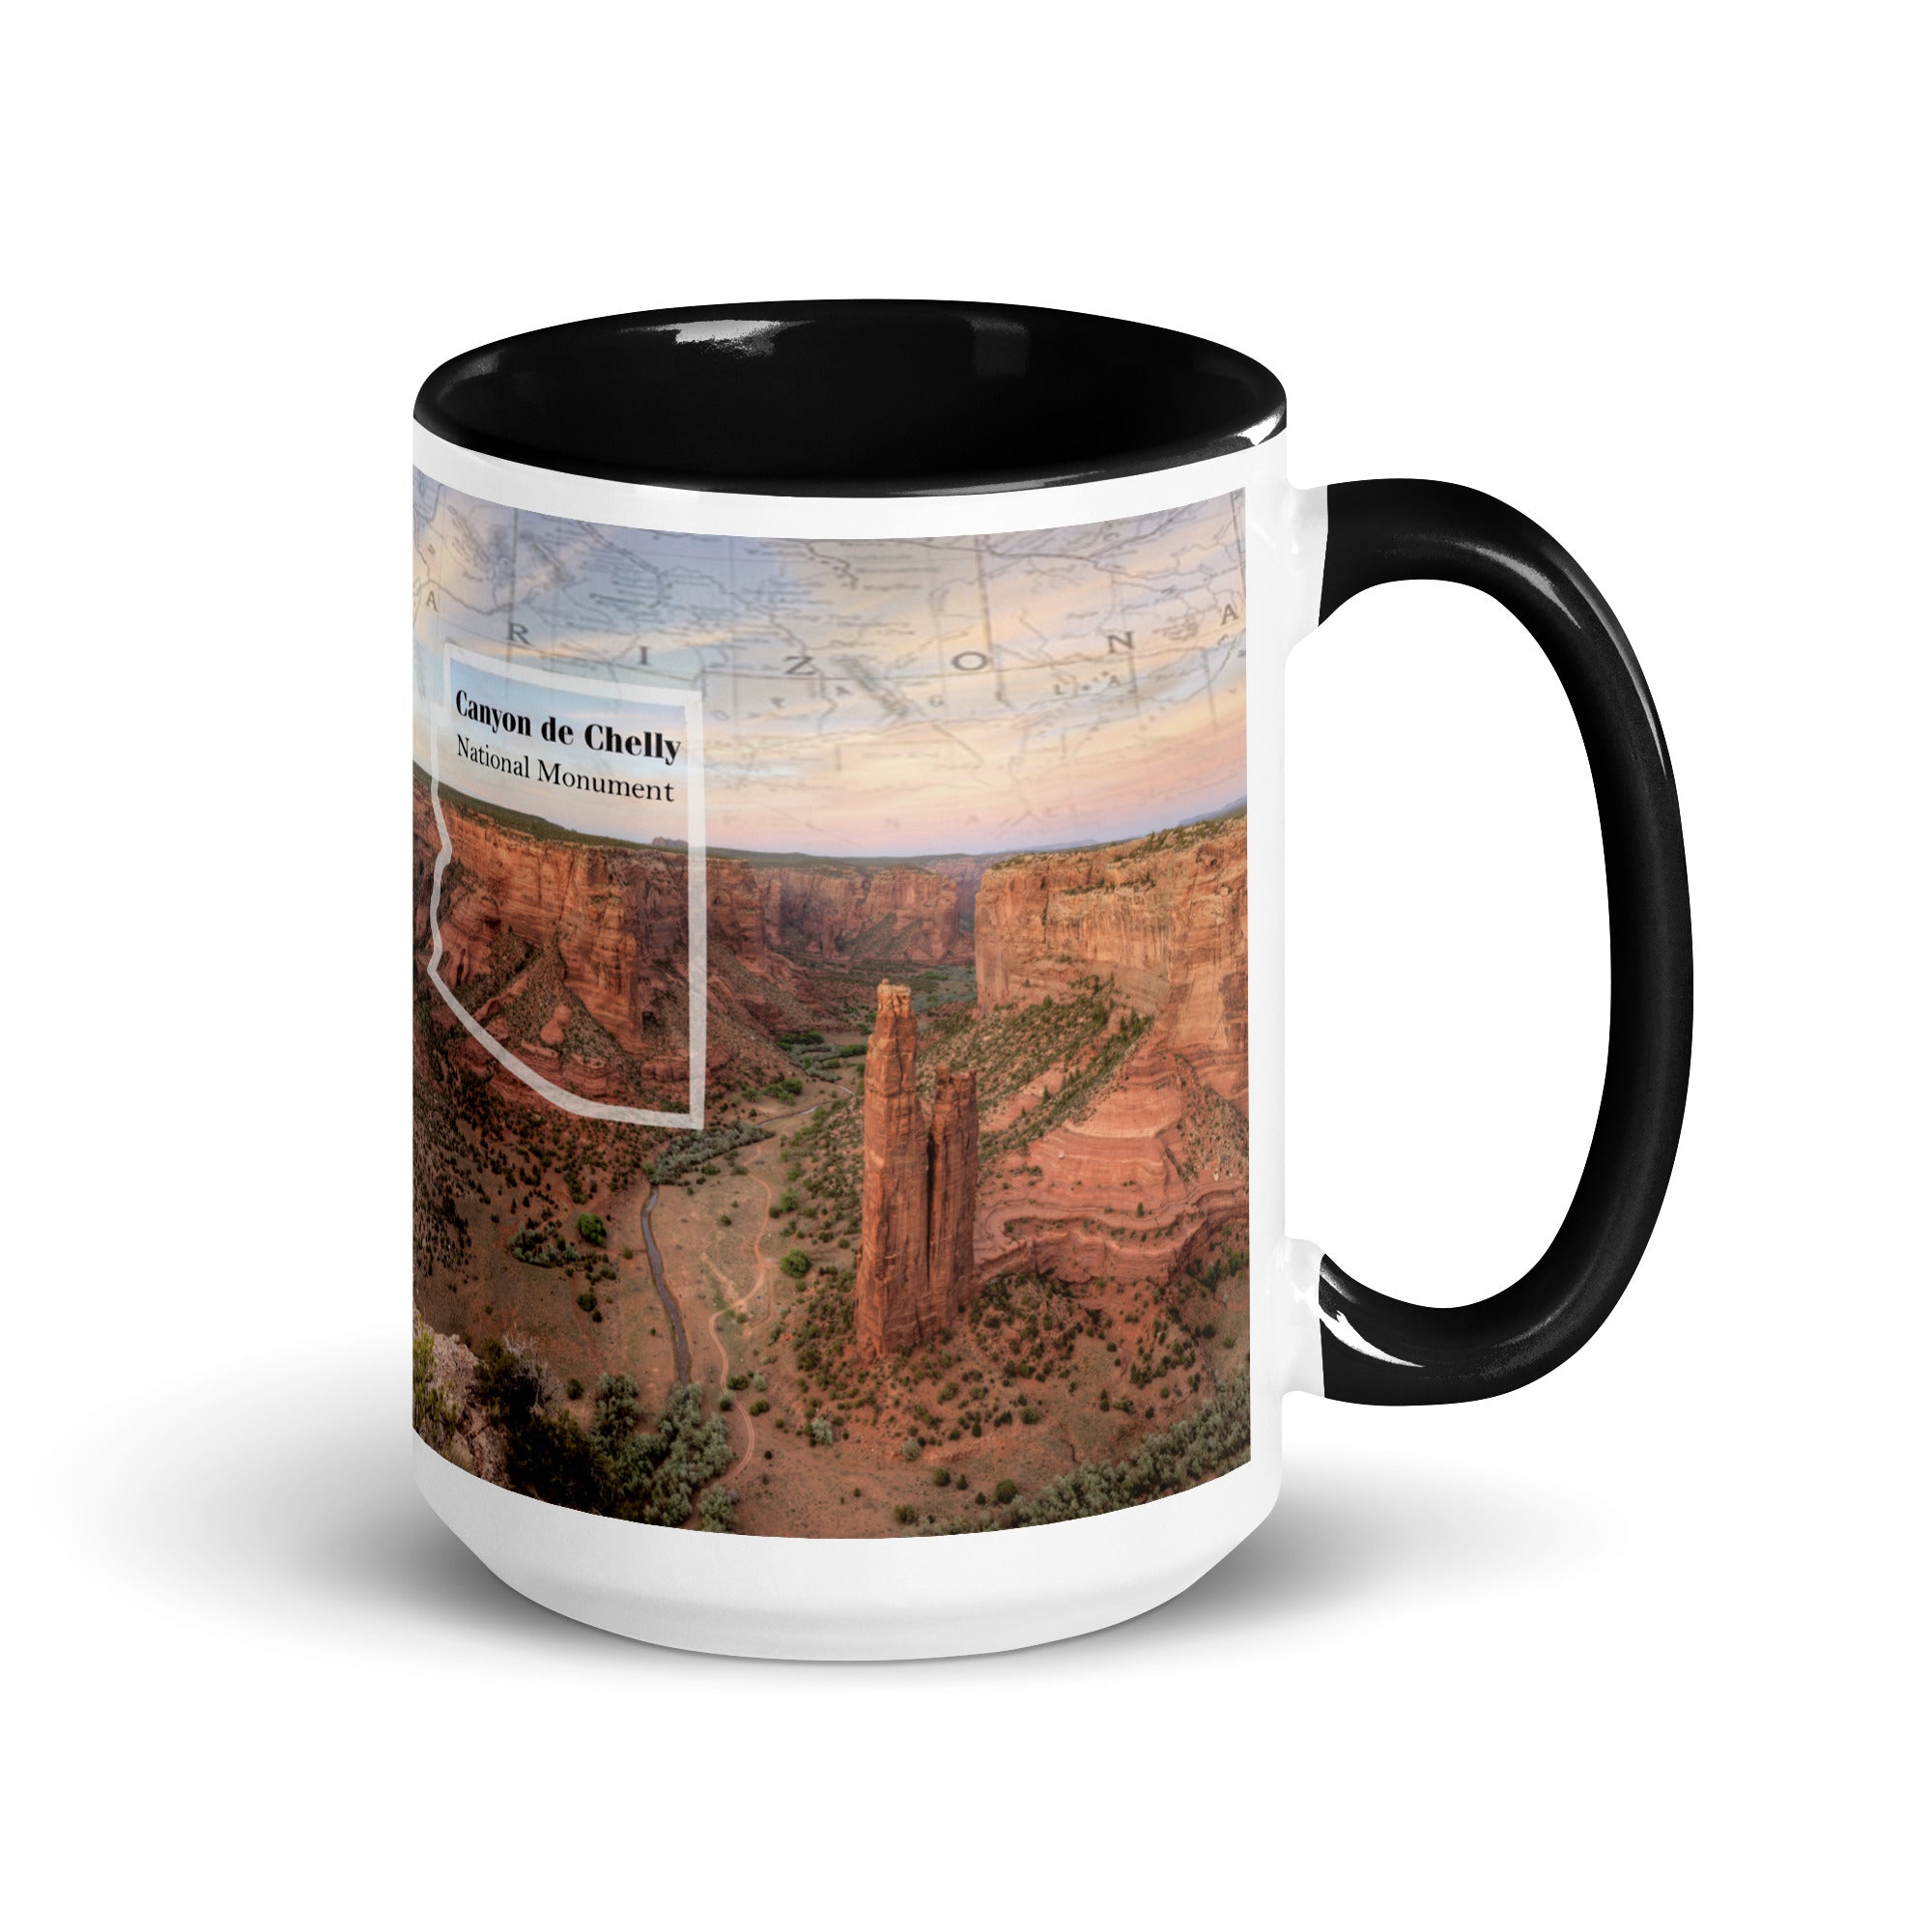 Canyon De Chelly National Monument Mug with Black Inside